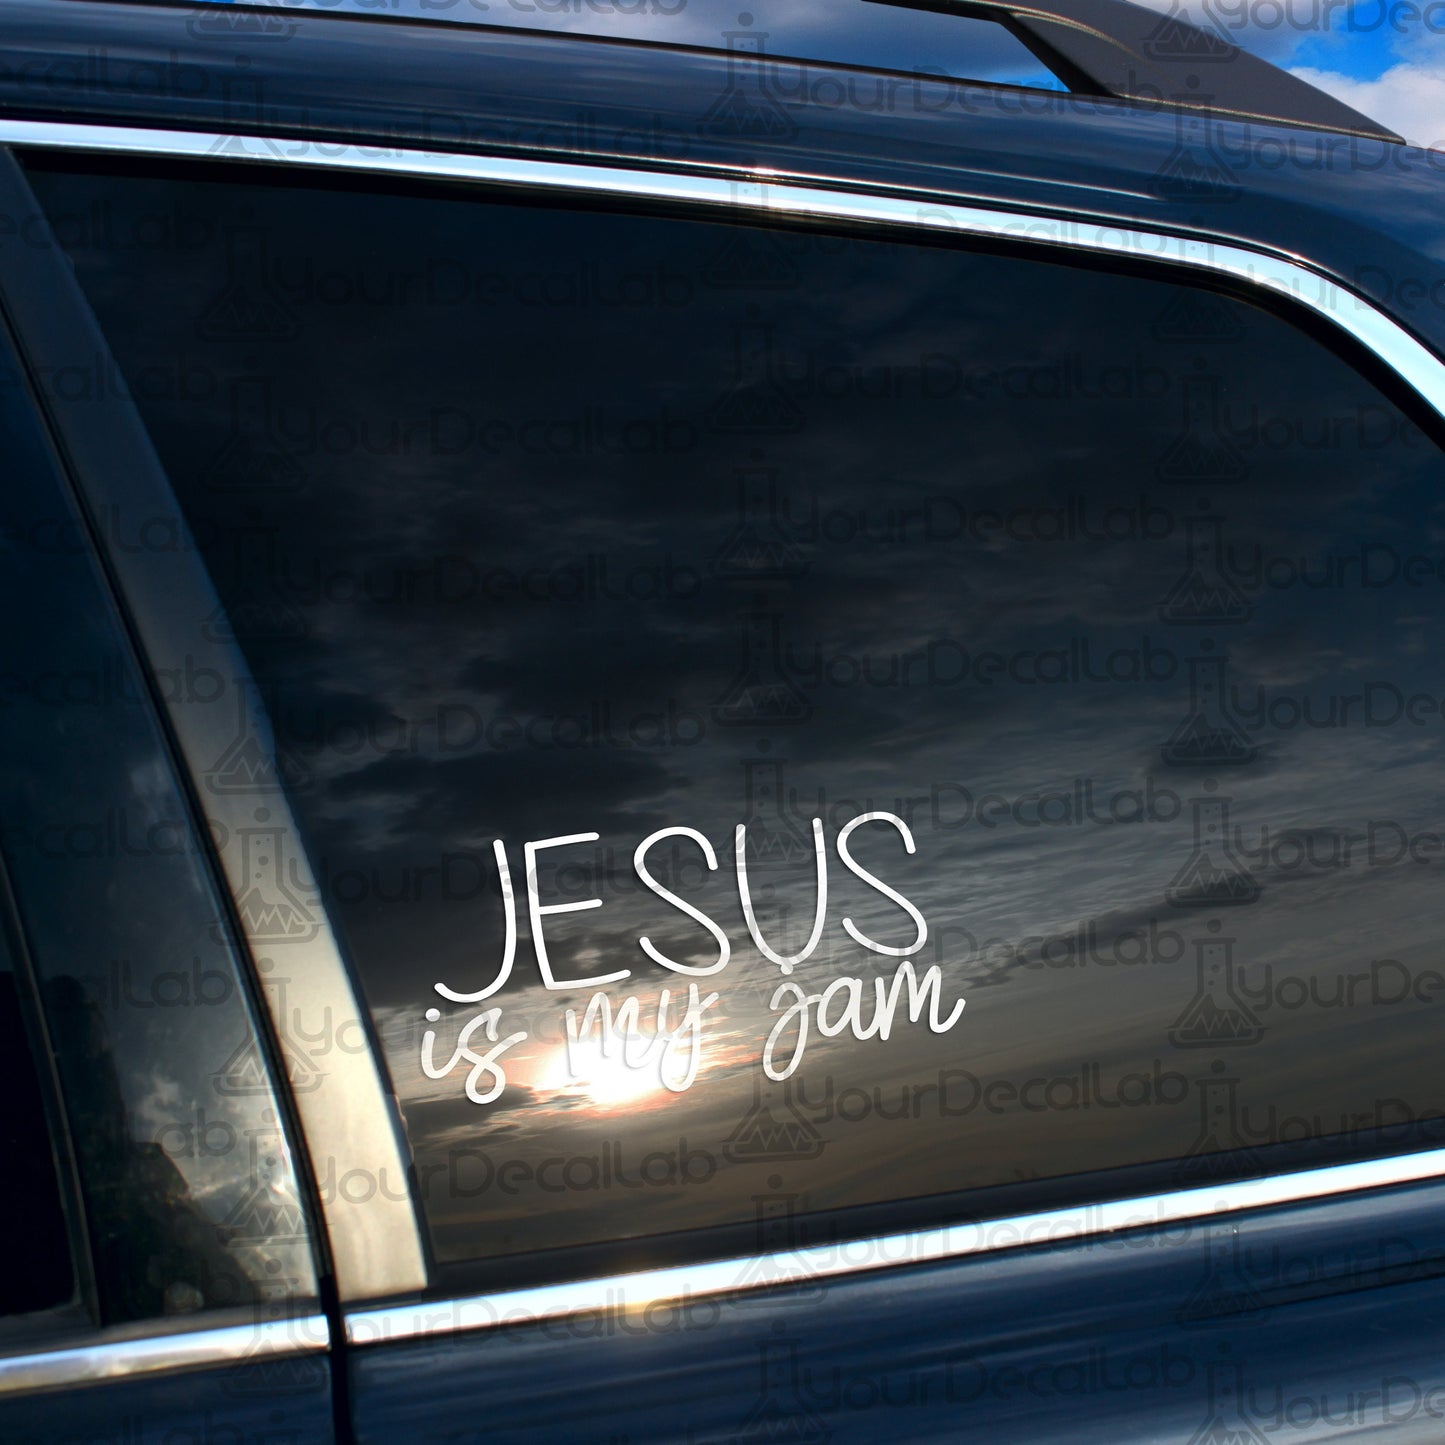 a car with a sticker that says jesus is the goat